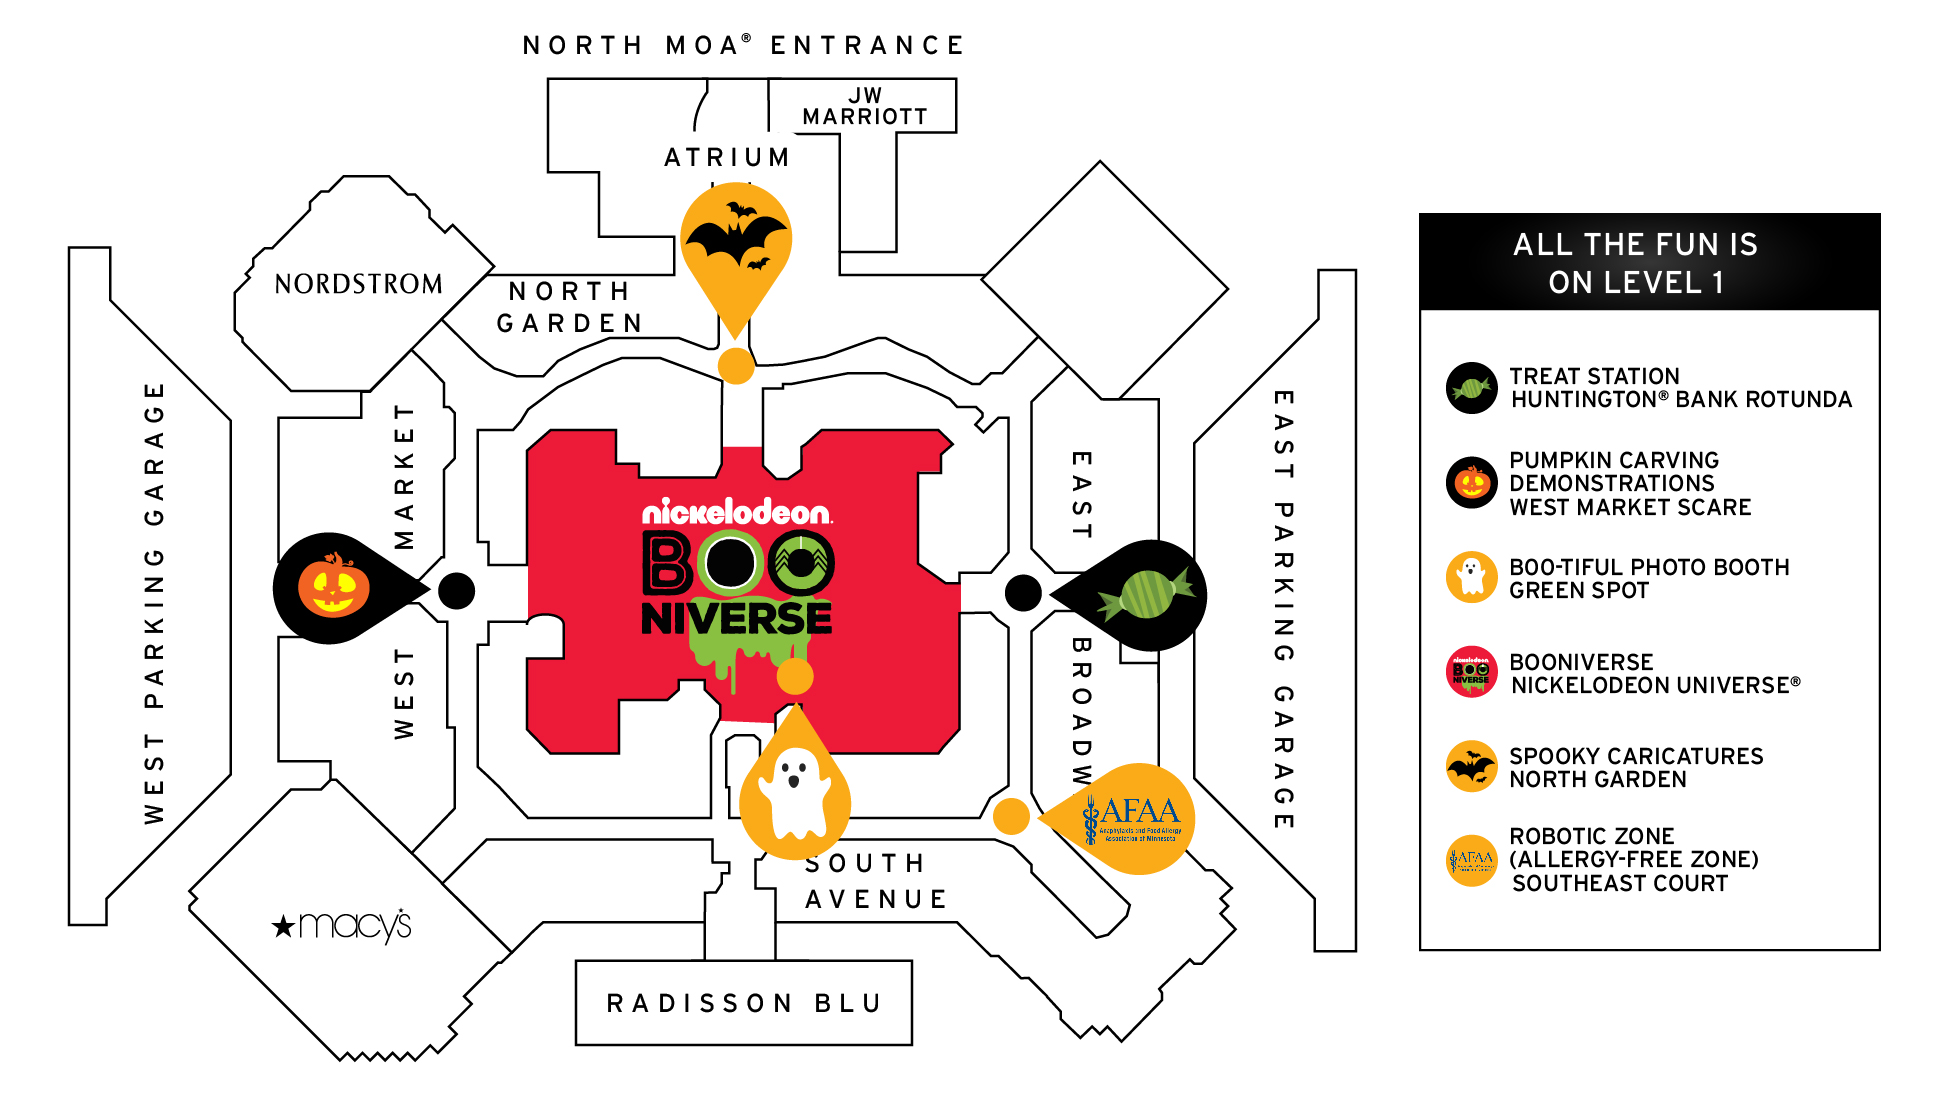 Mall-O-Ween Activation Station Map